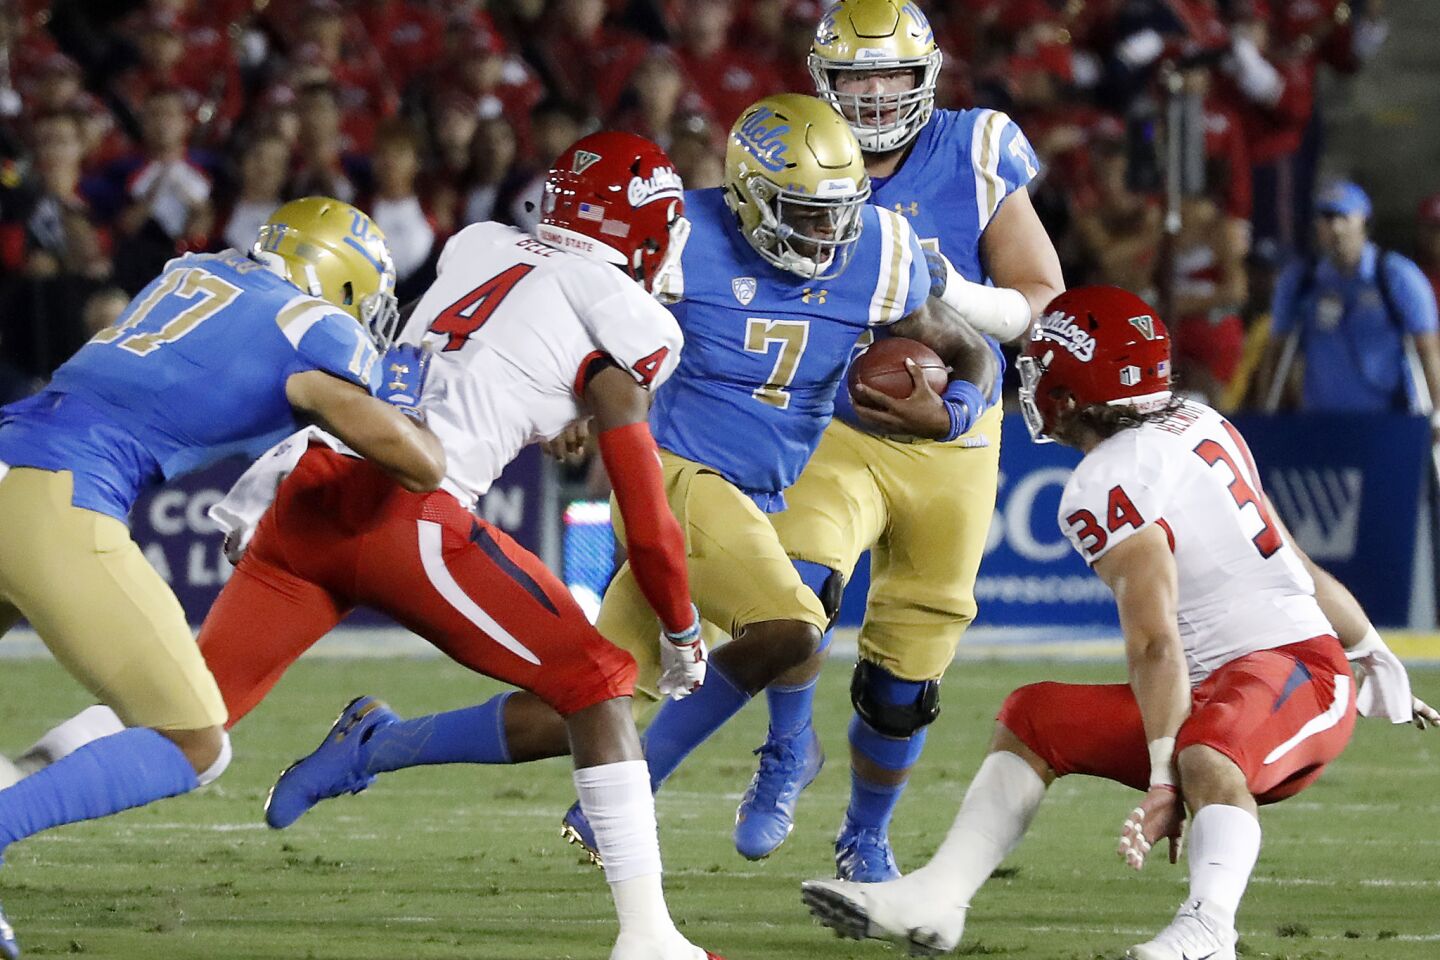 UCLA quarterback Dorian Thompson-Robinson (7) looks for room to run against Fresno State in the first quarter on Saturday at the Rose Bowl.